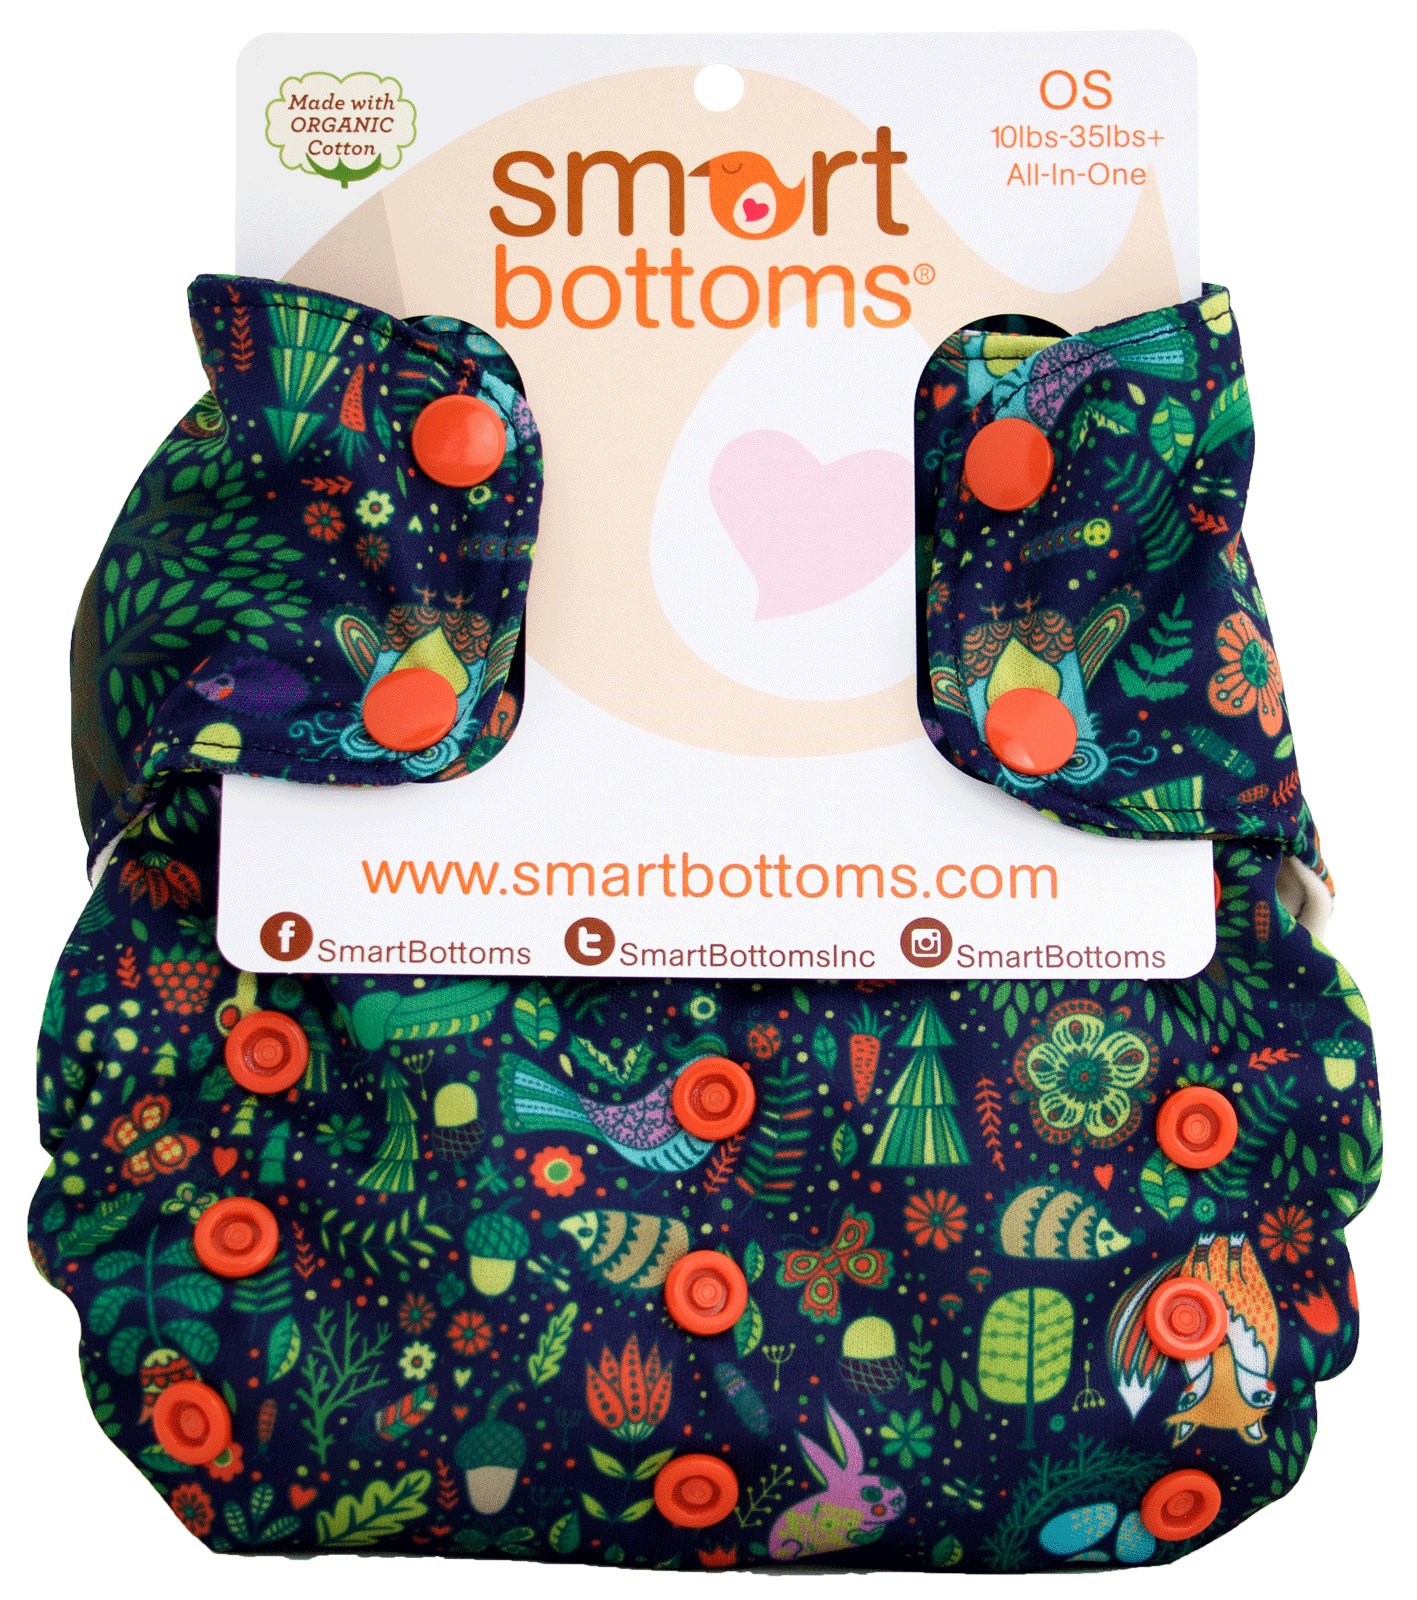 Smart Bottoms 3.1 One Size All-in-One nappy Pattern: Enchanted